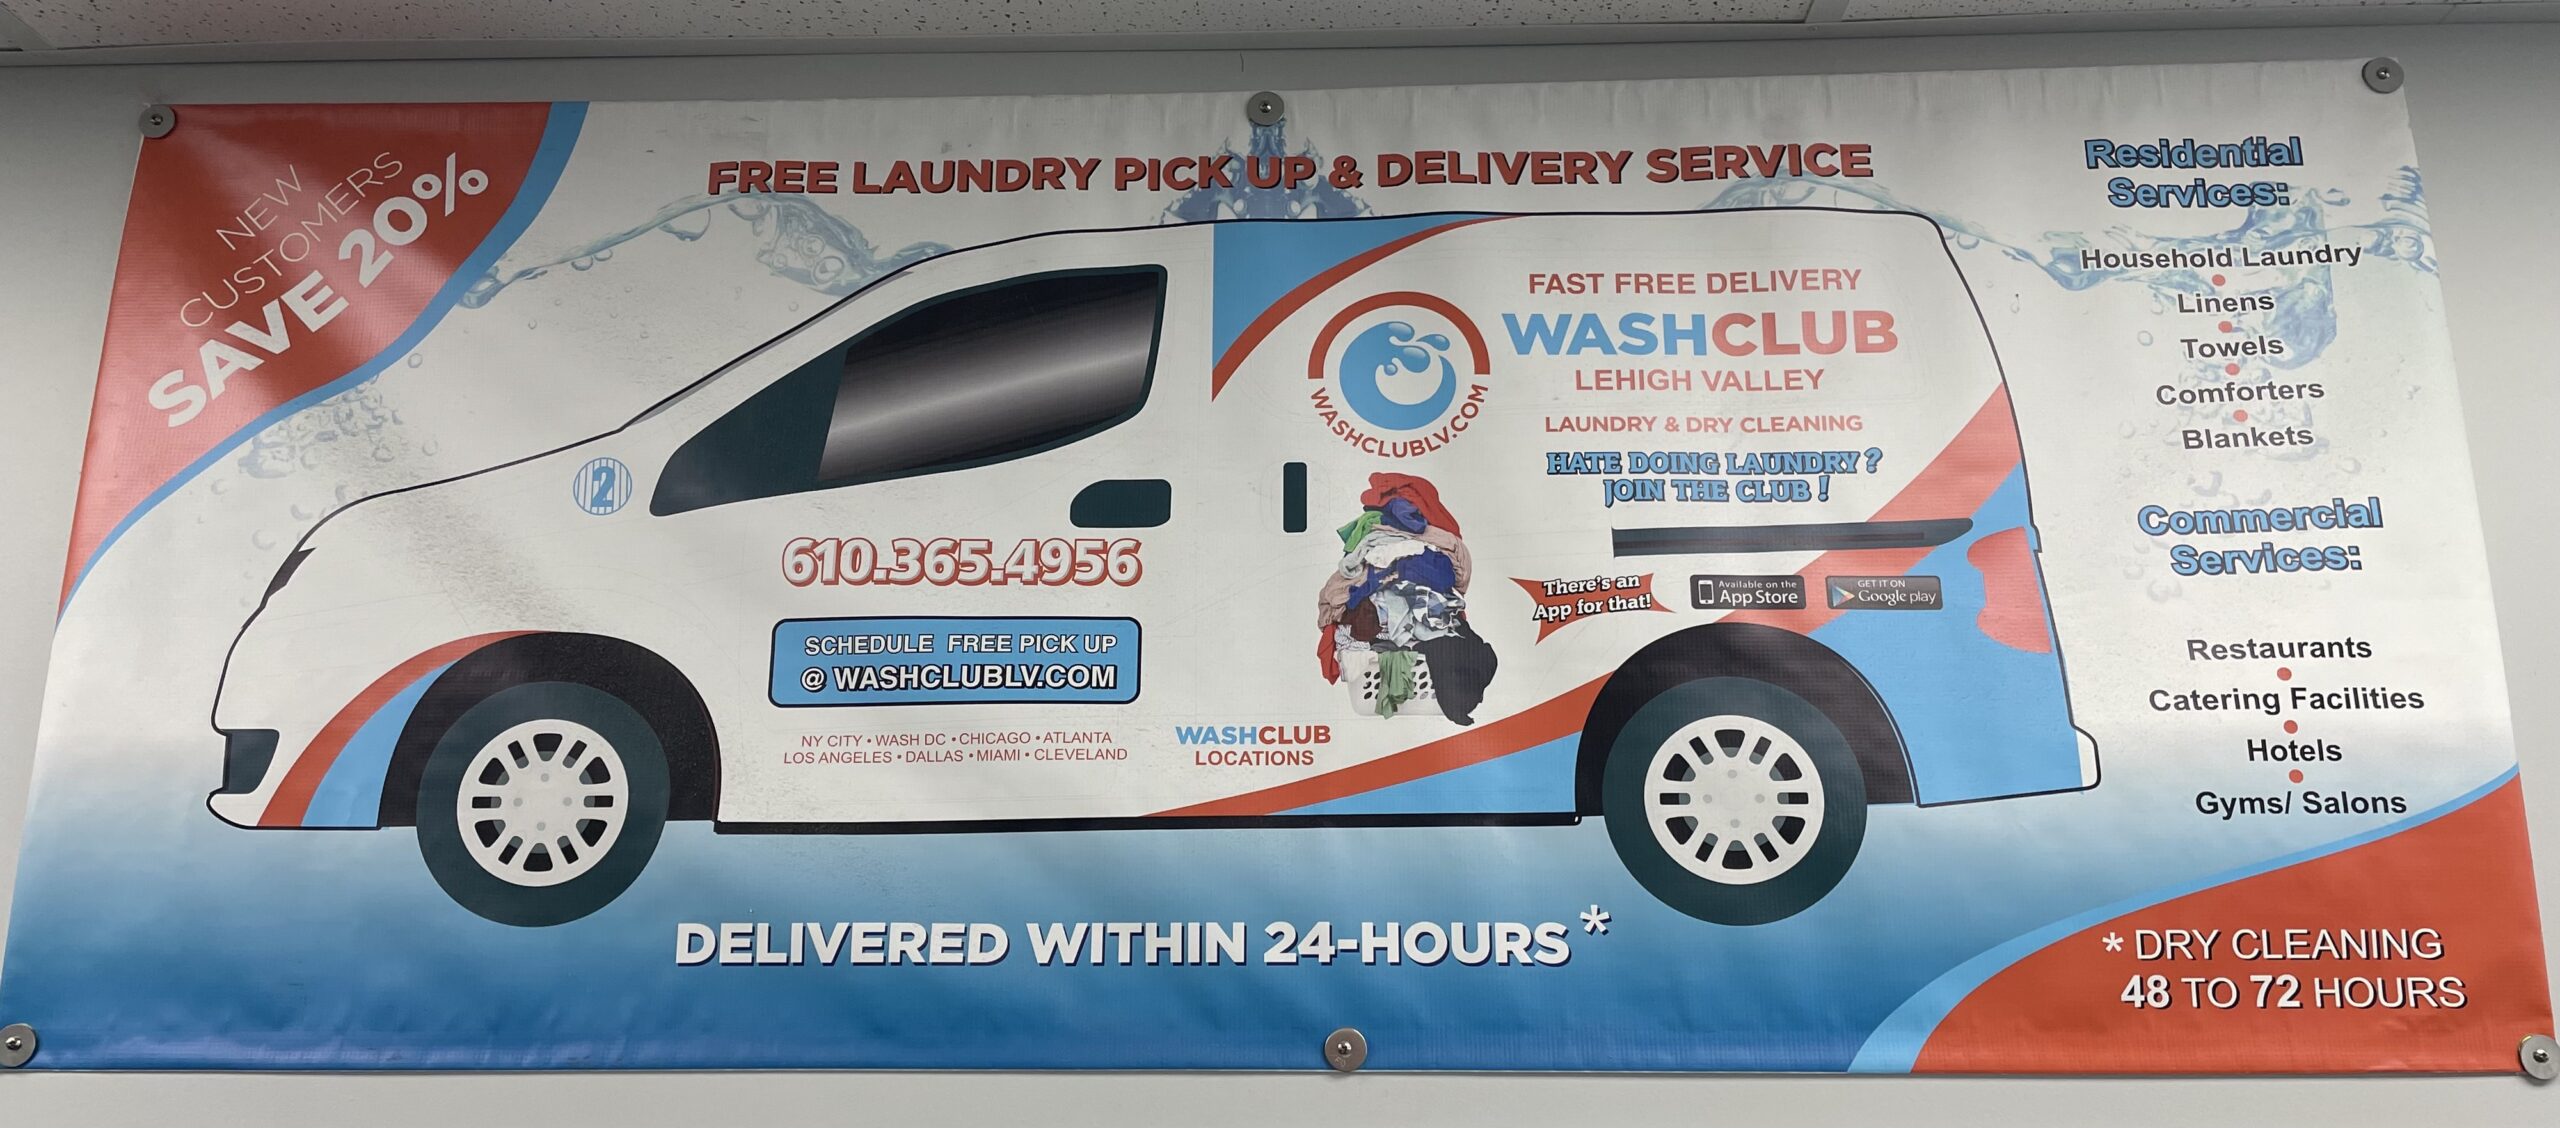 Free Laundry Pickup & Delivery Service